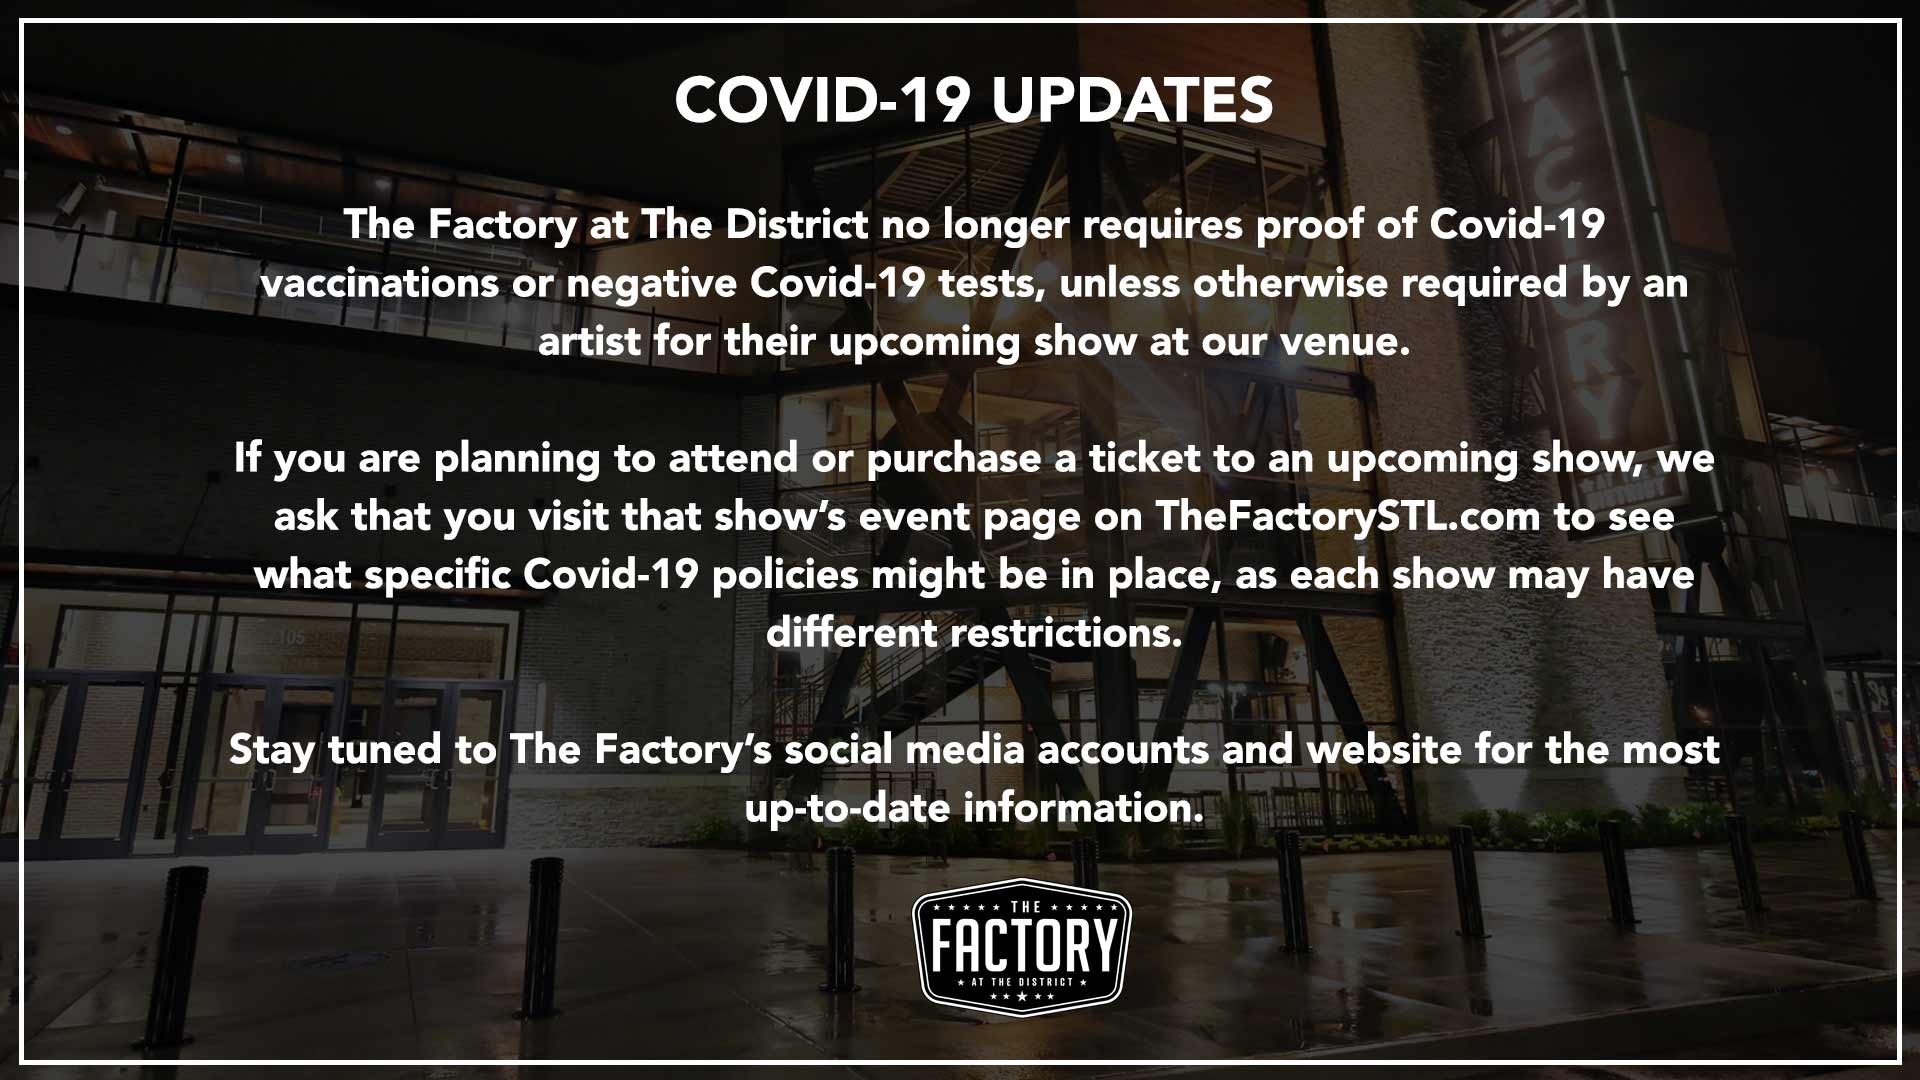 Covid-19 Policy Drop - The Factory